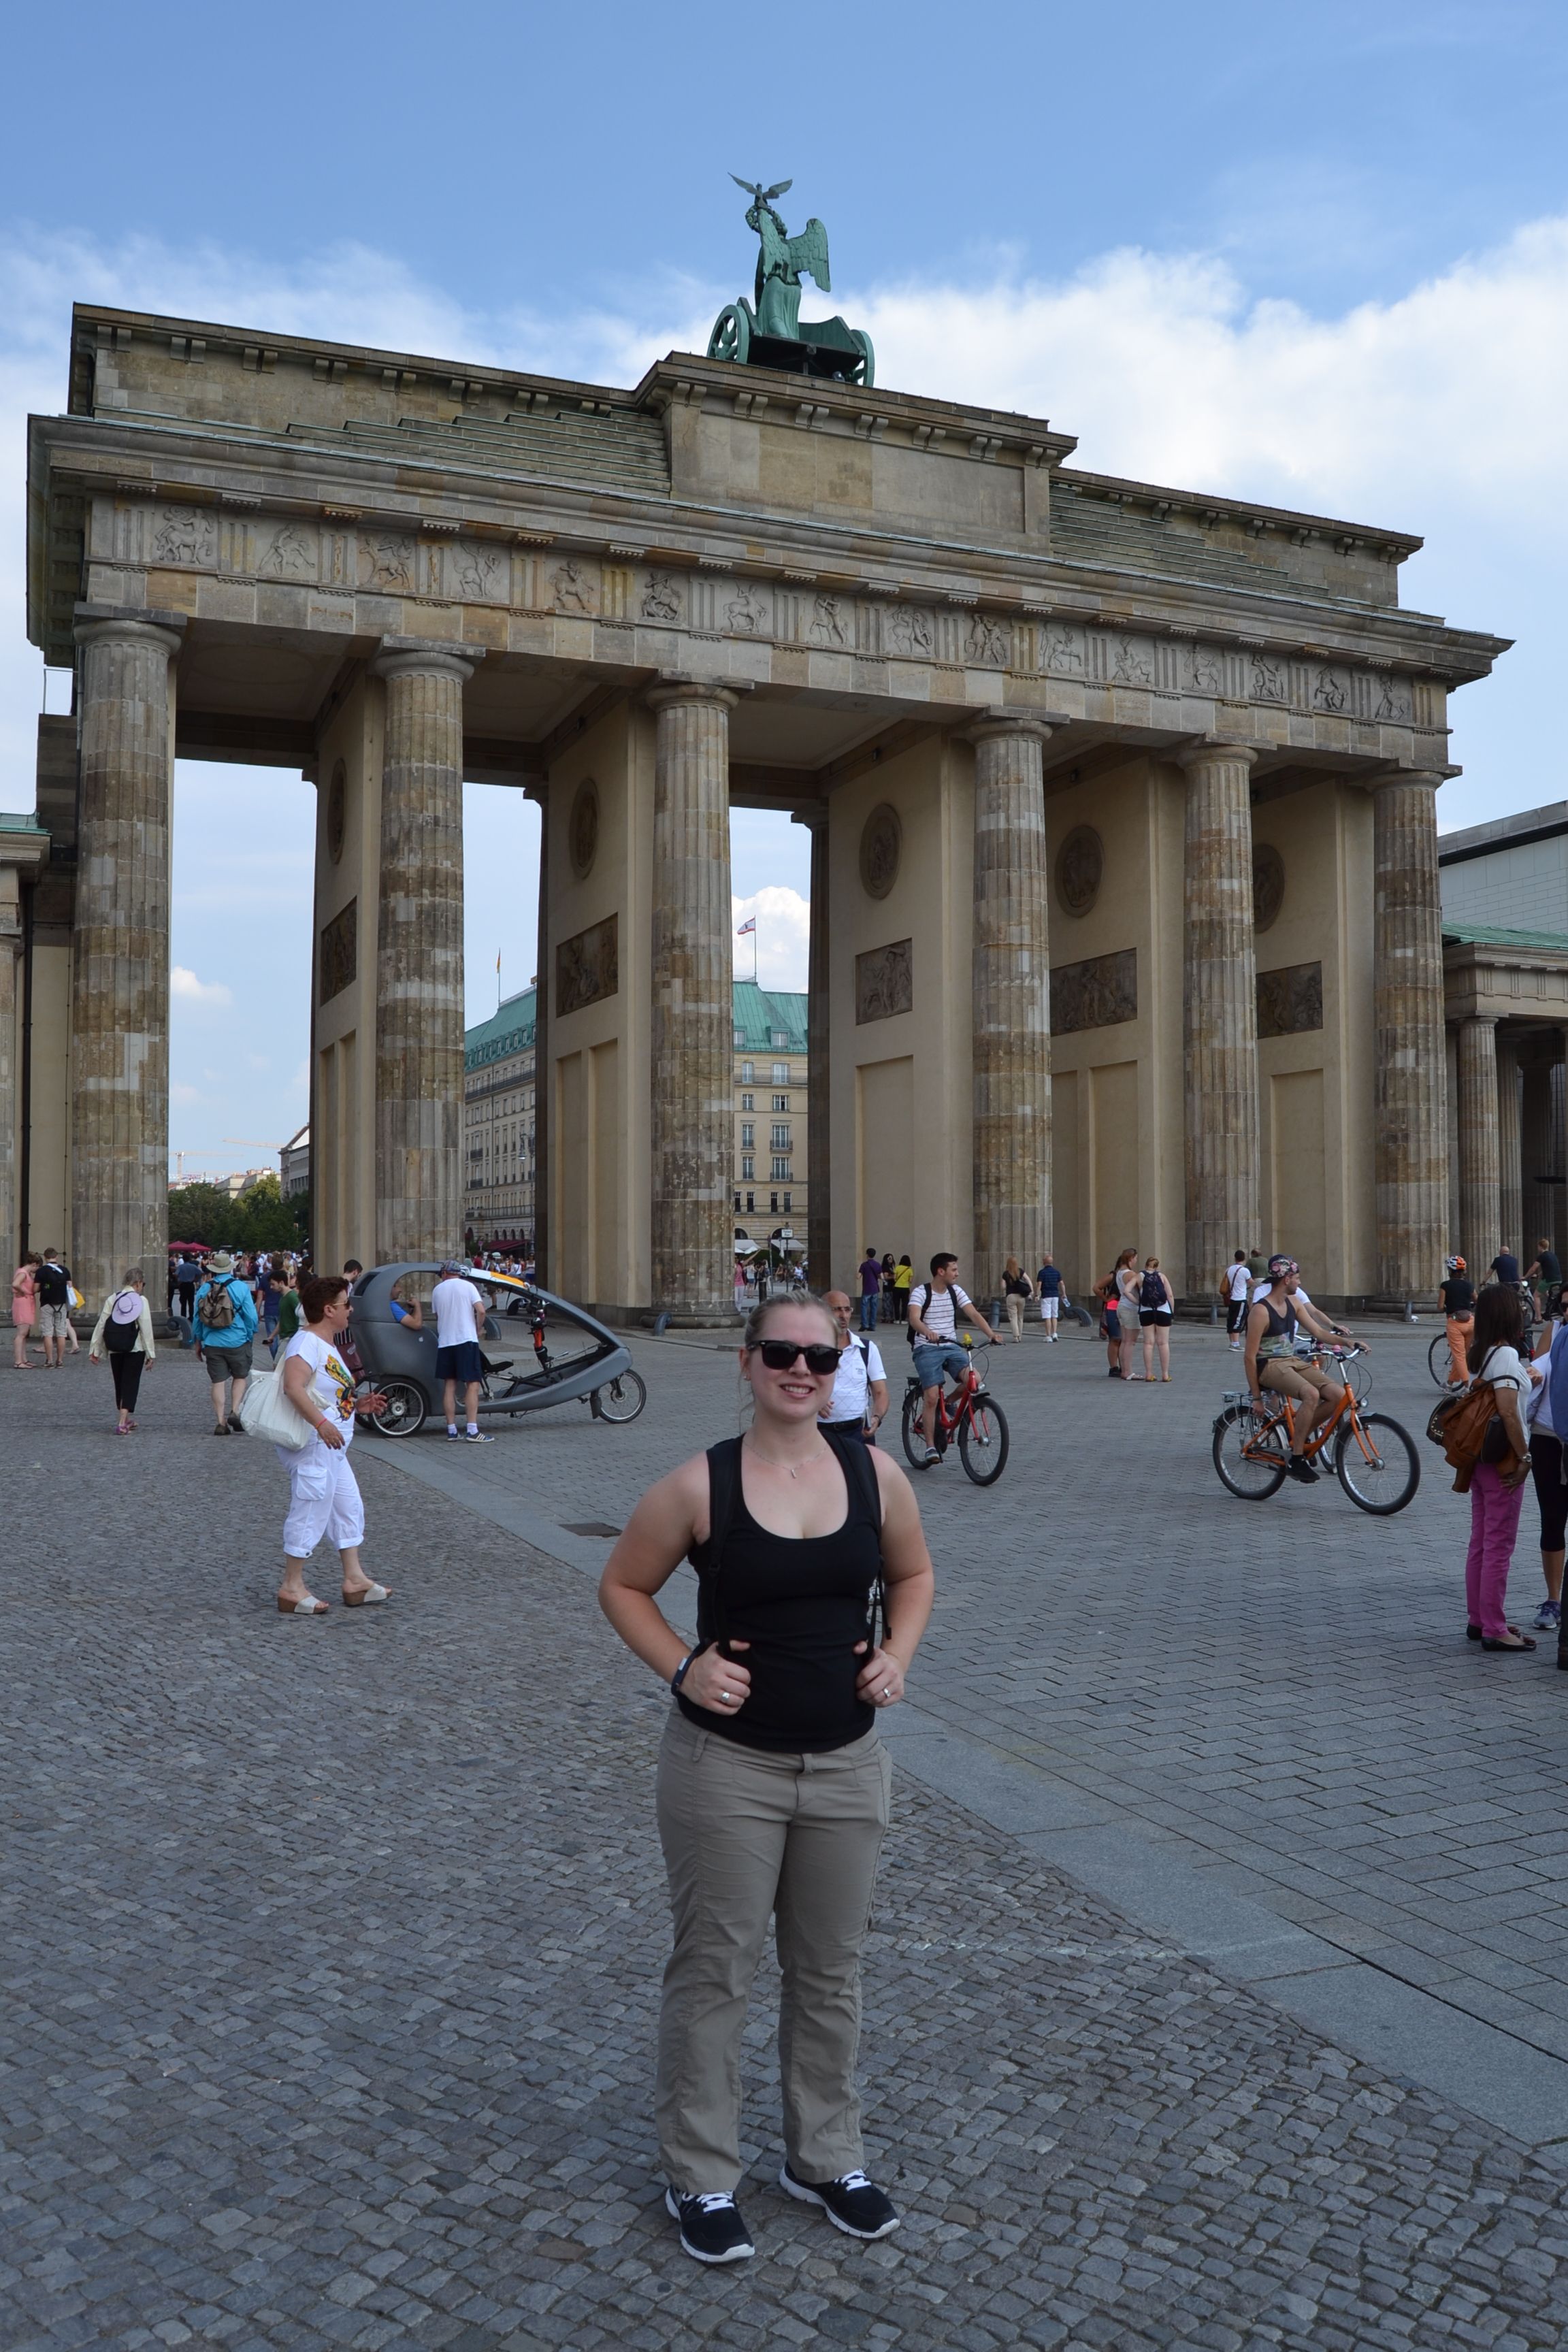 white woman in tan pants, black tank top and wearing sunglasses standing in front of the Brandenburg Gate